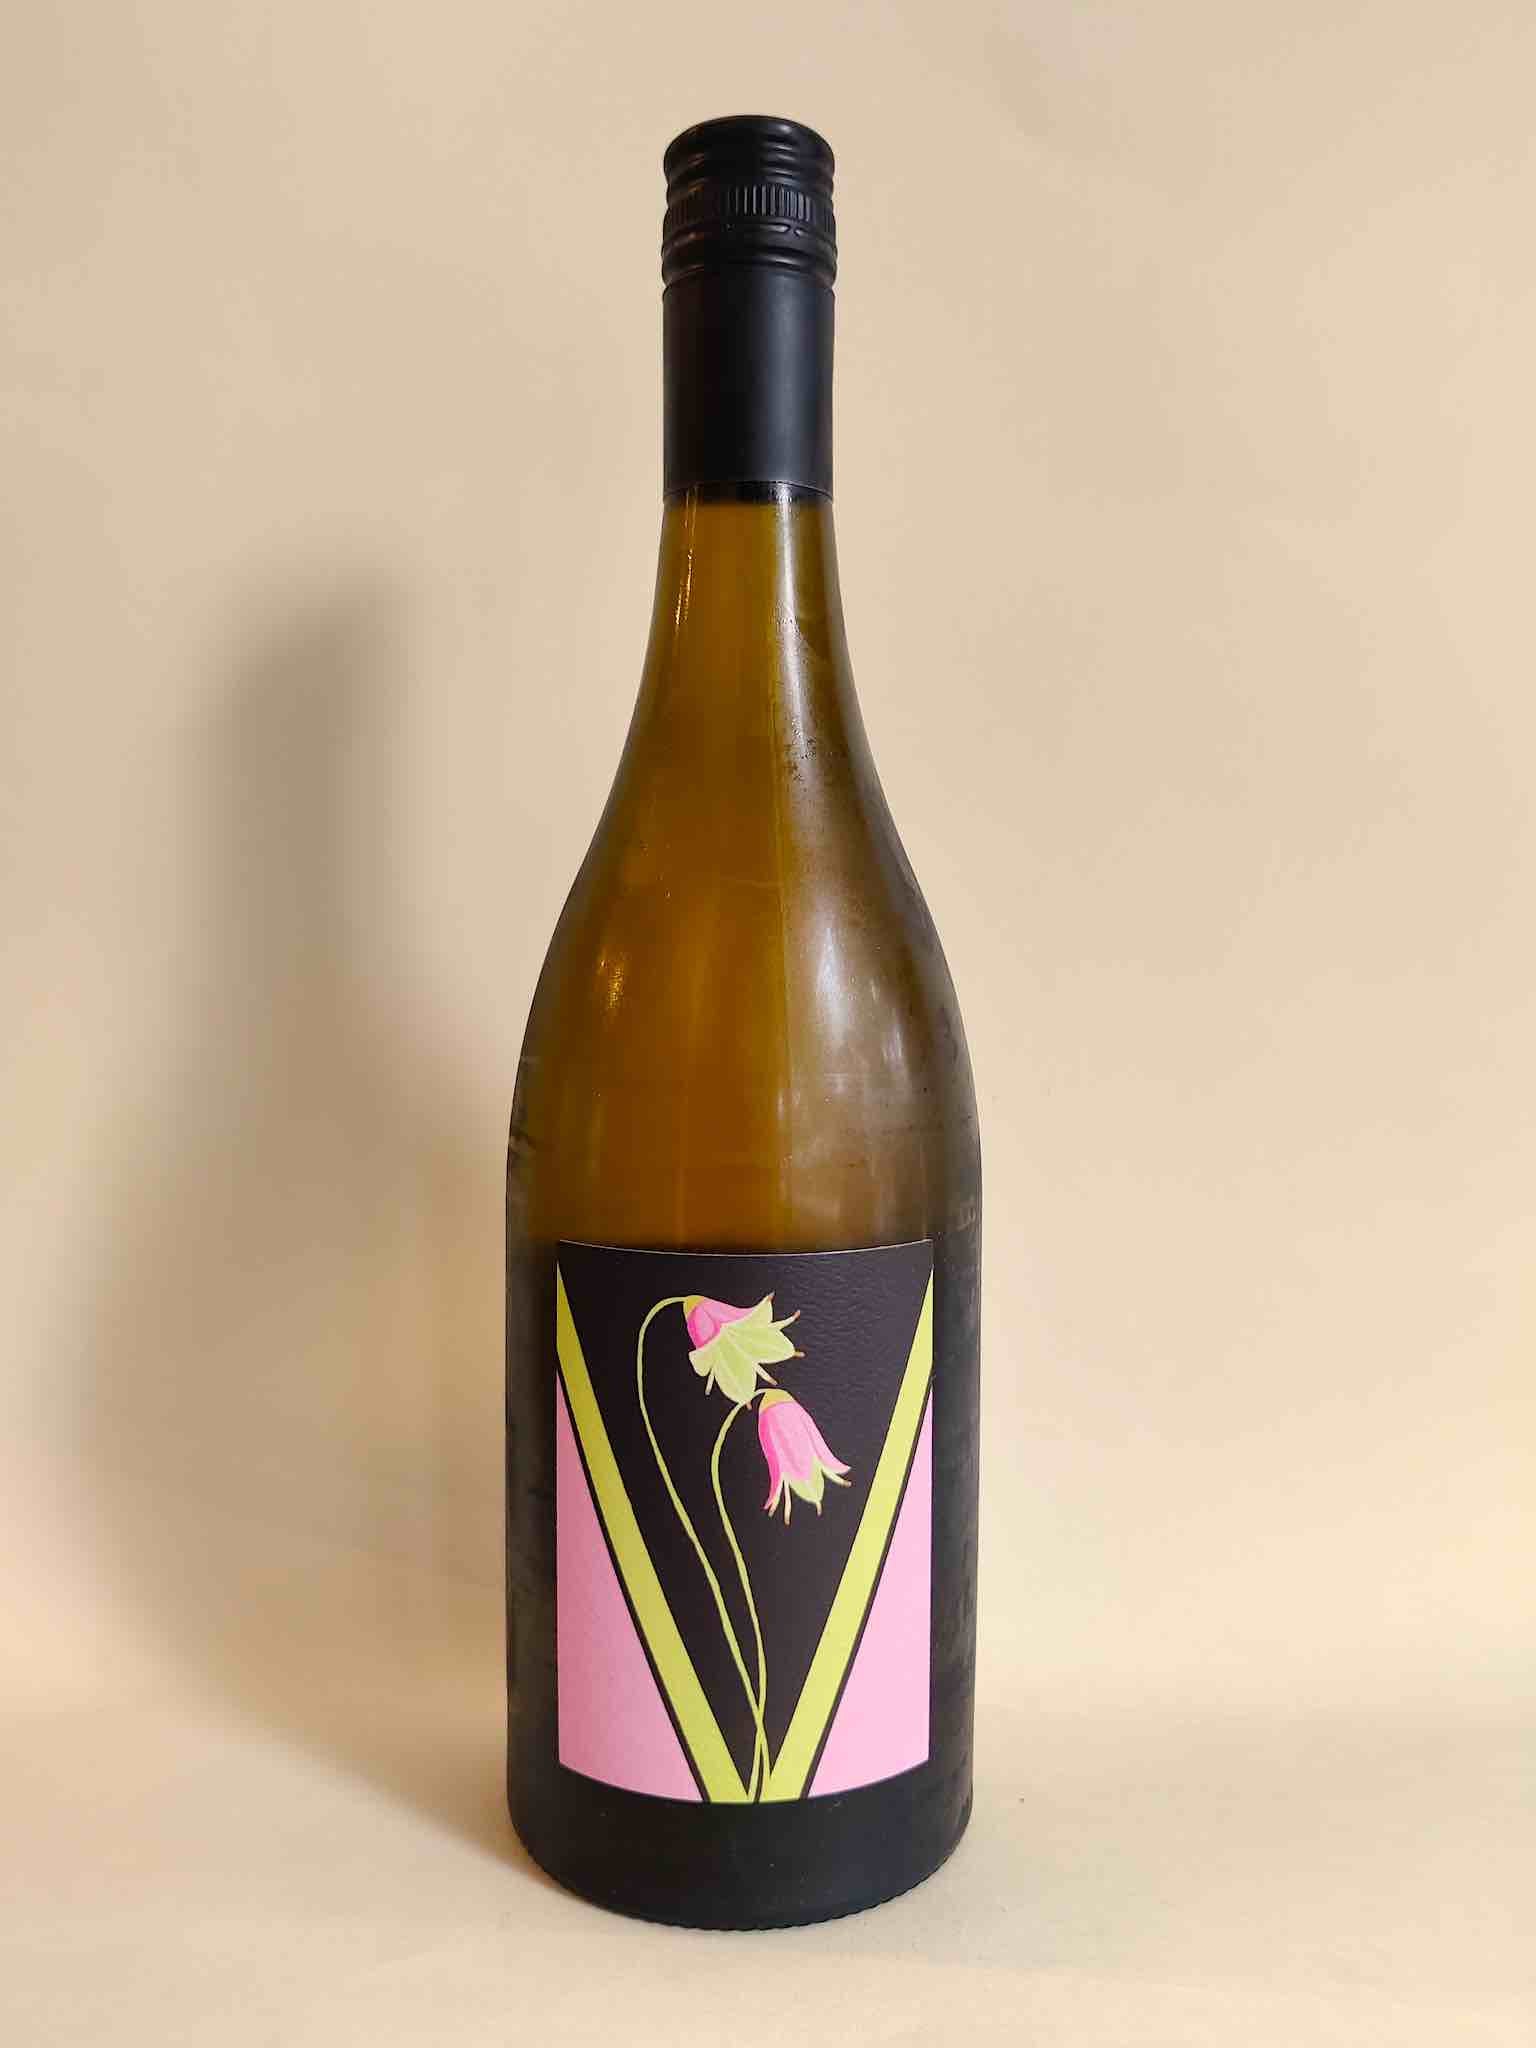 A bottle of Allevare Pinot Gris from Geelong, Victoria. 